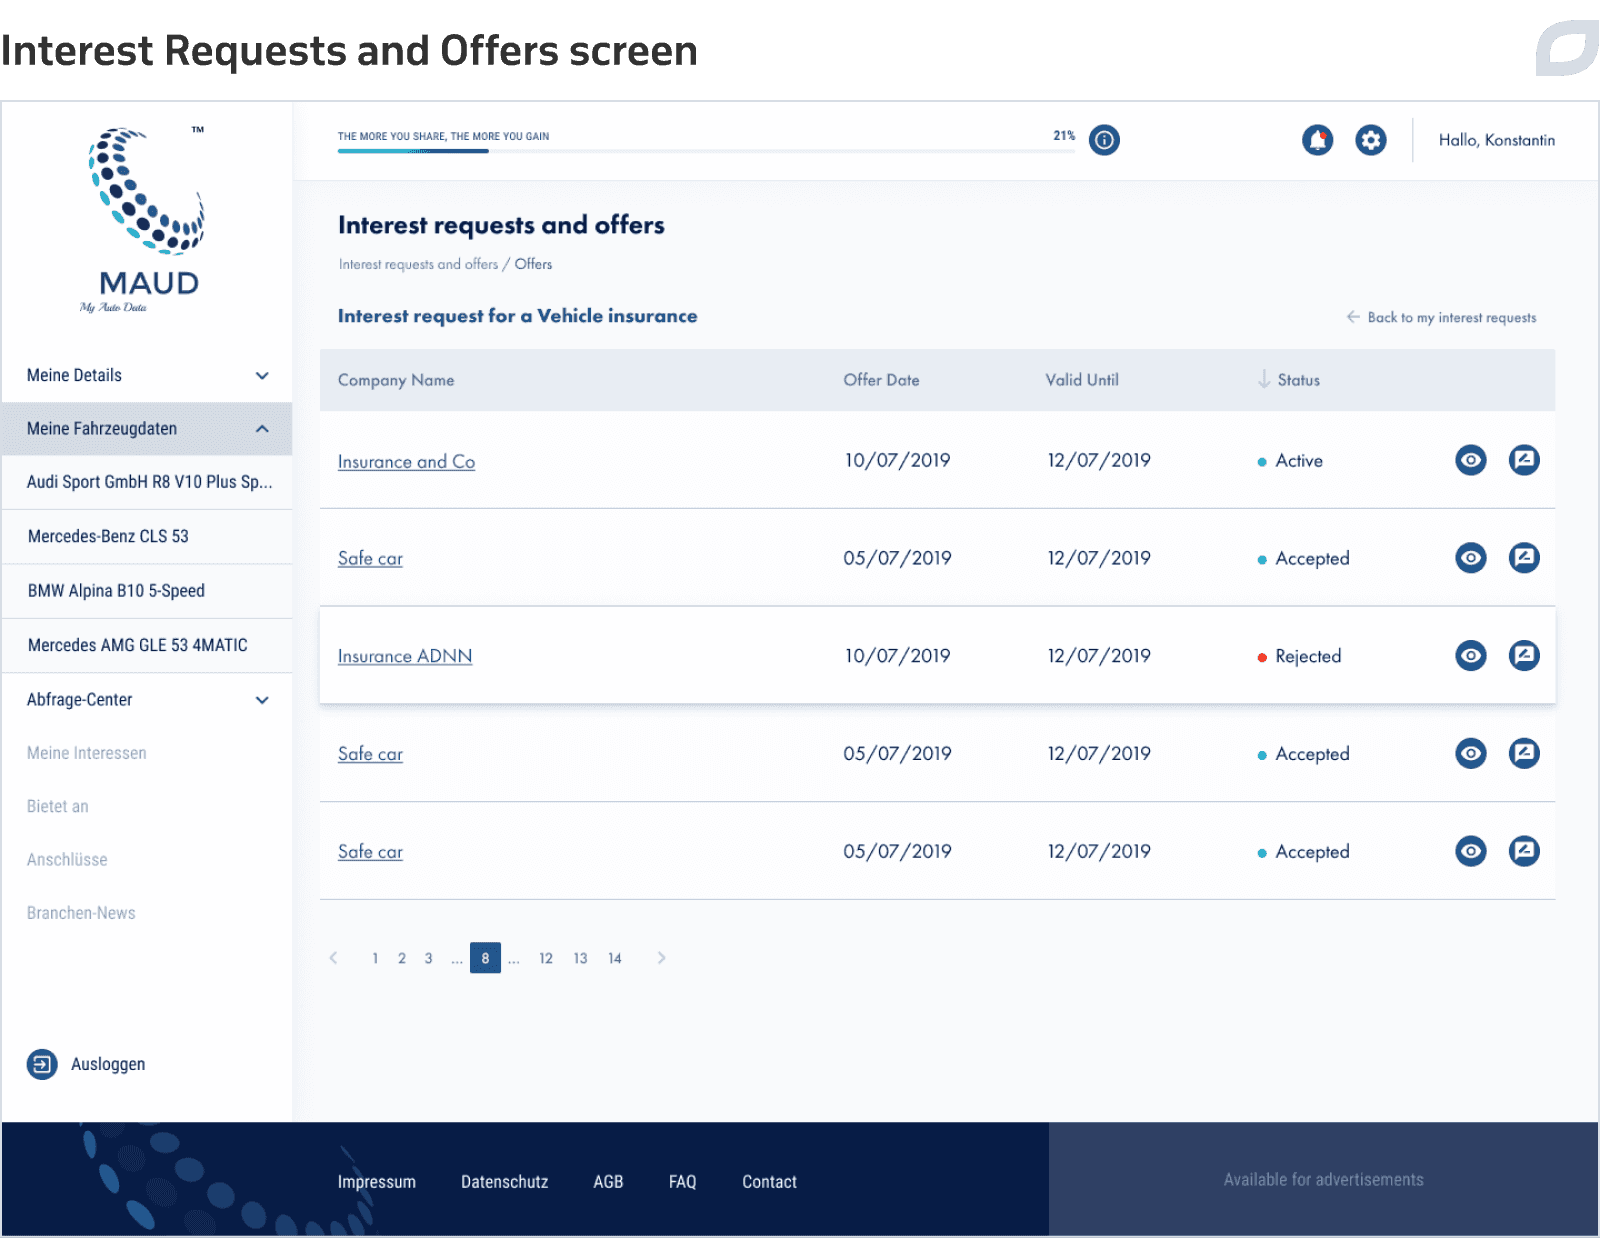 Interest Requests and Offers screen